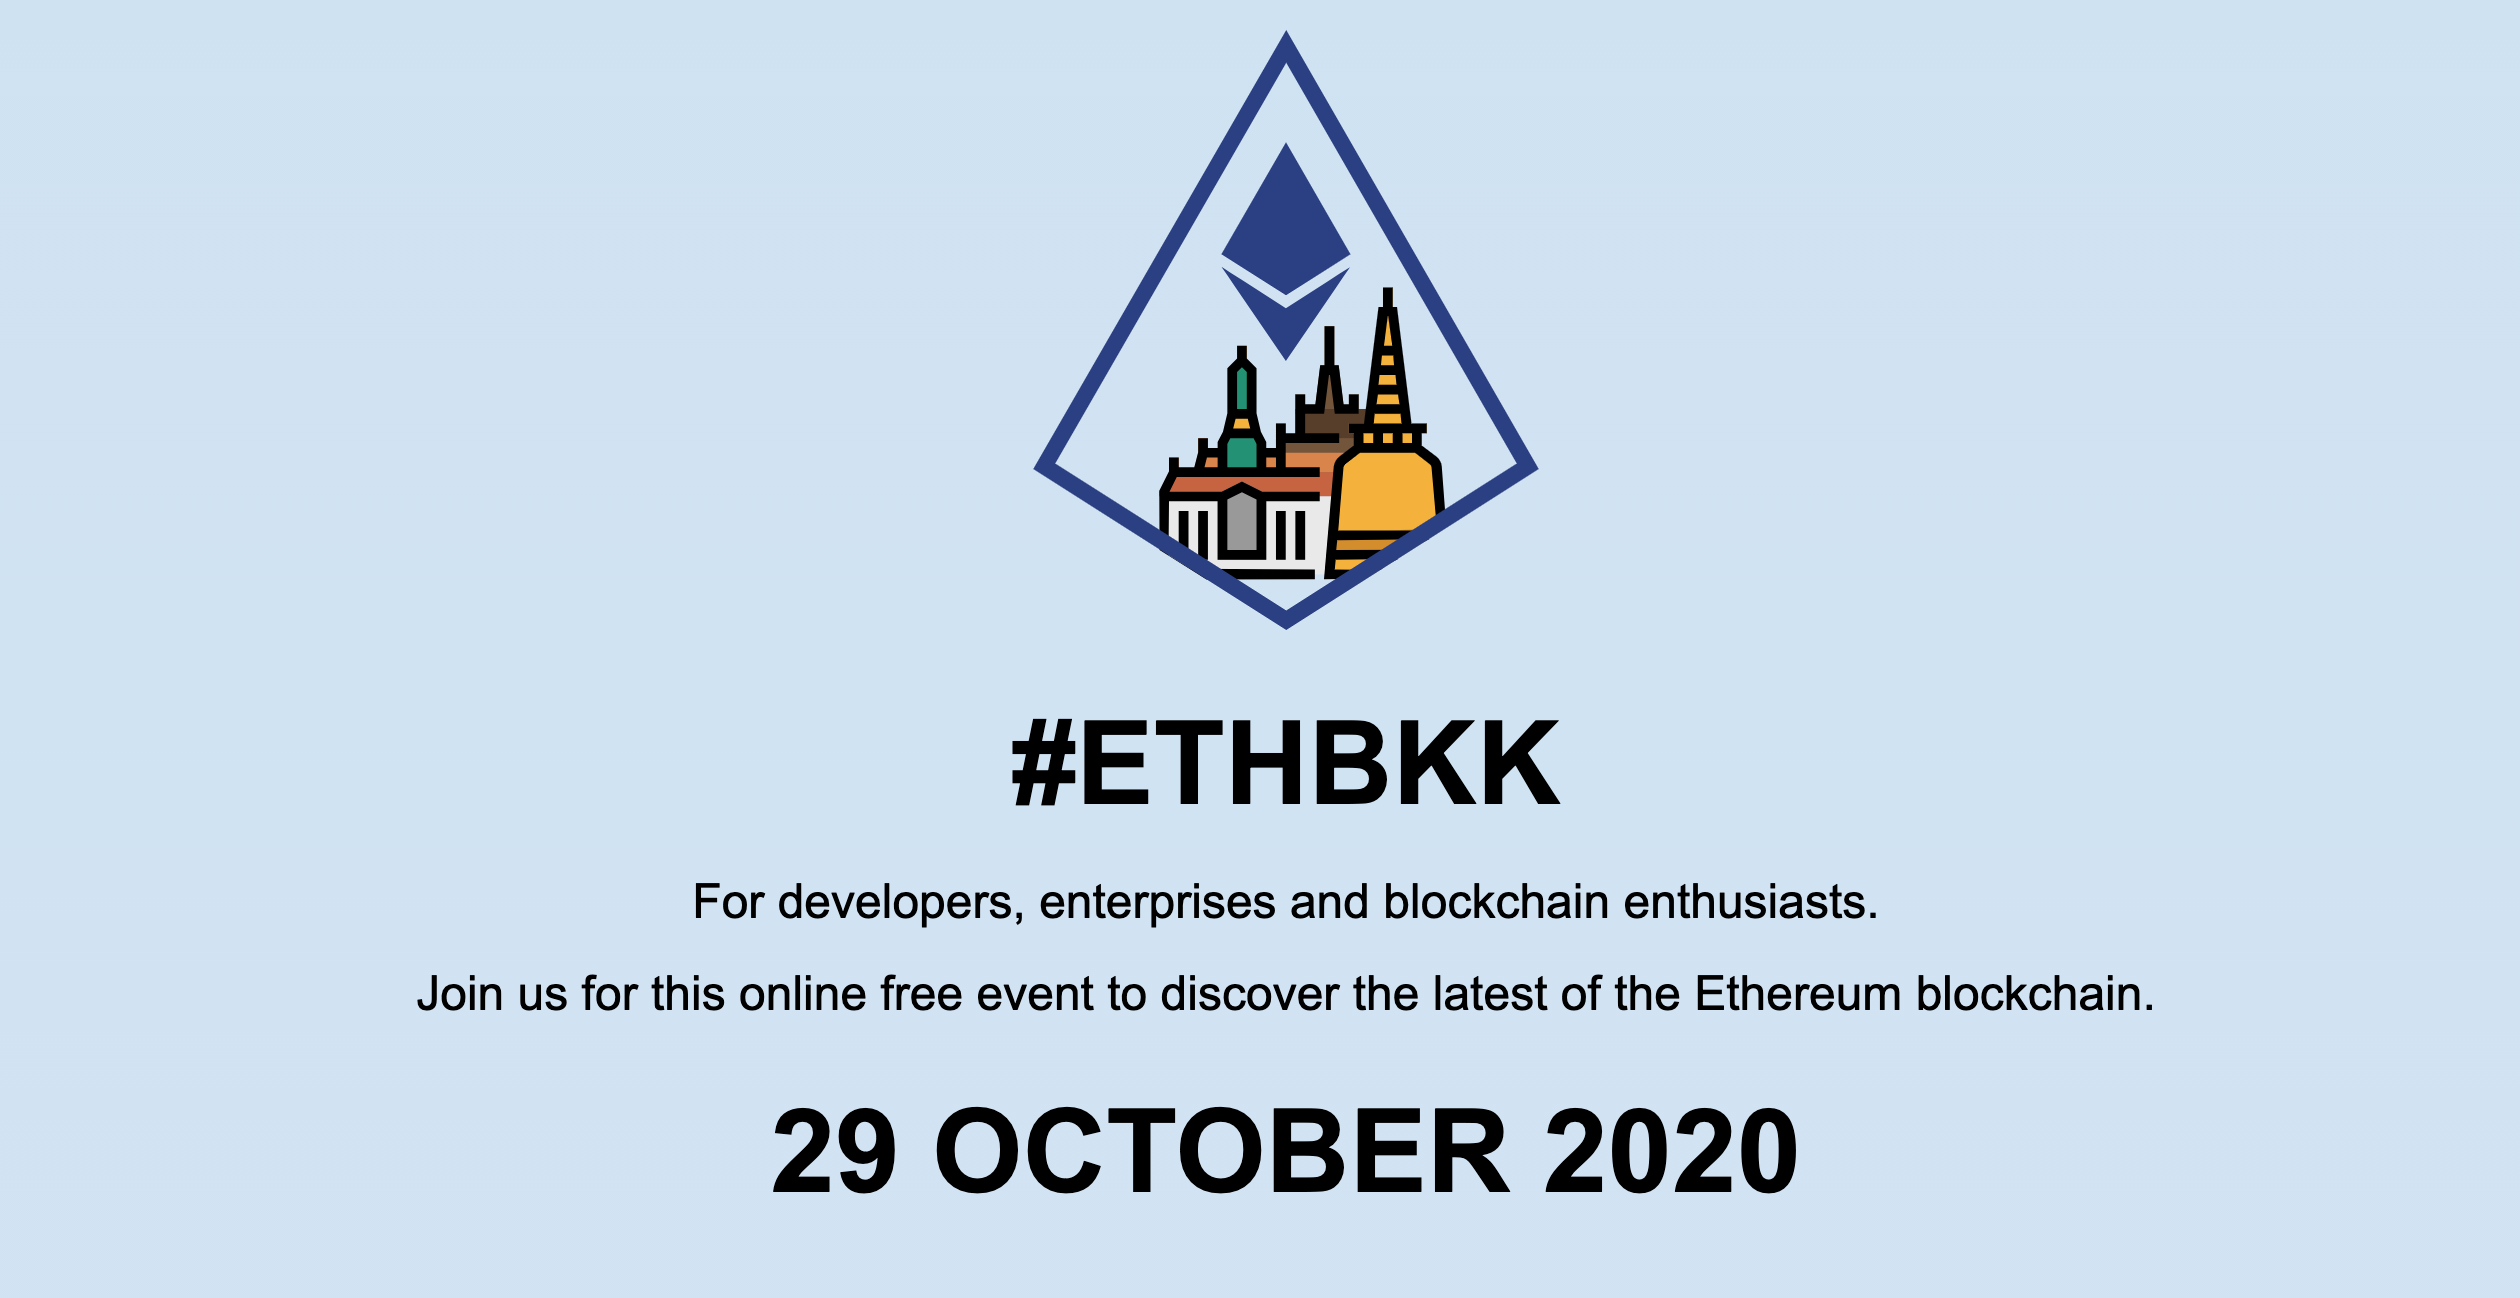 Couger’s Ishiguro speaks as a representative of EEA Japan at ETHBKK 2020, the world's leading Ethereum conference